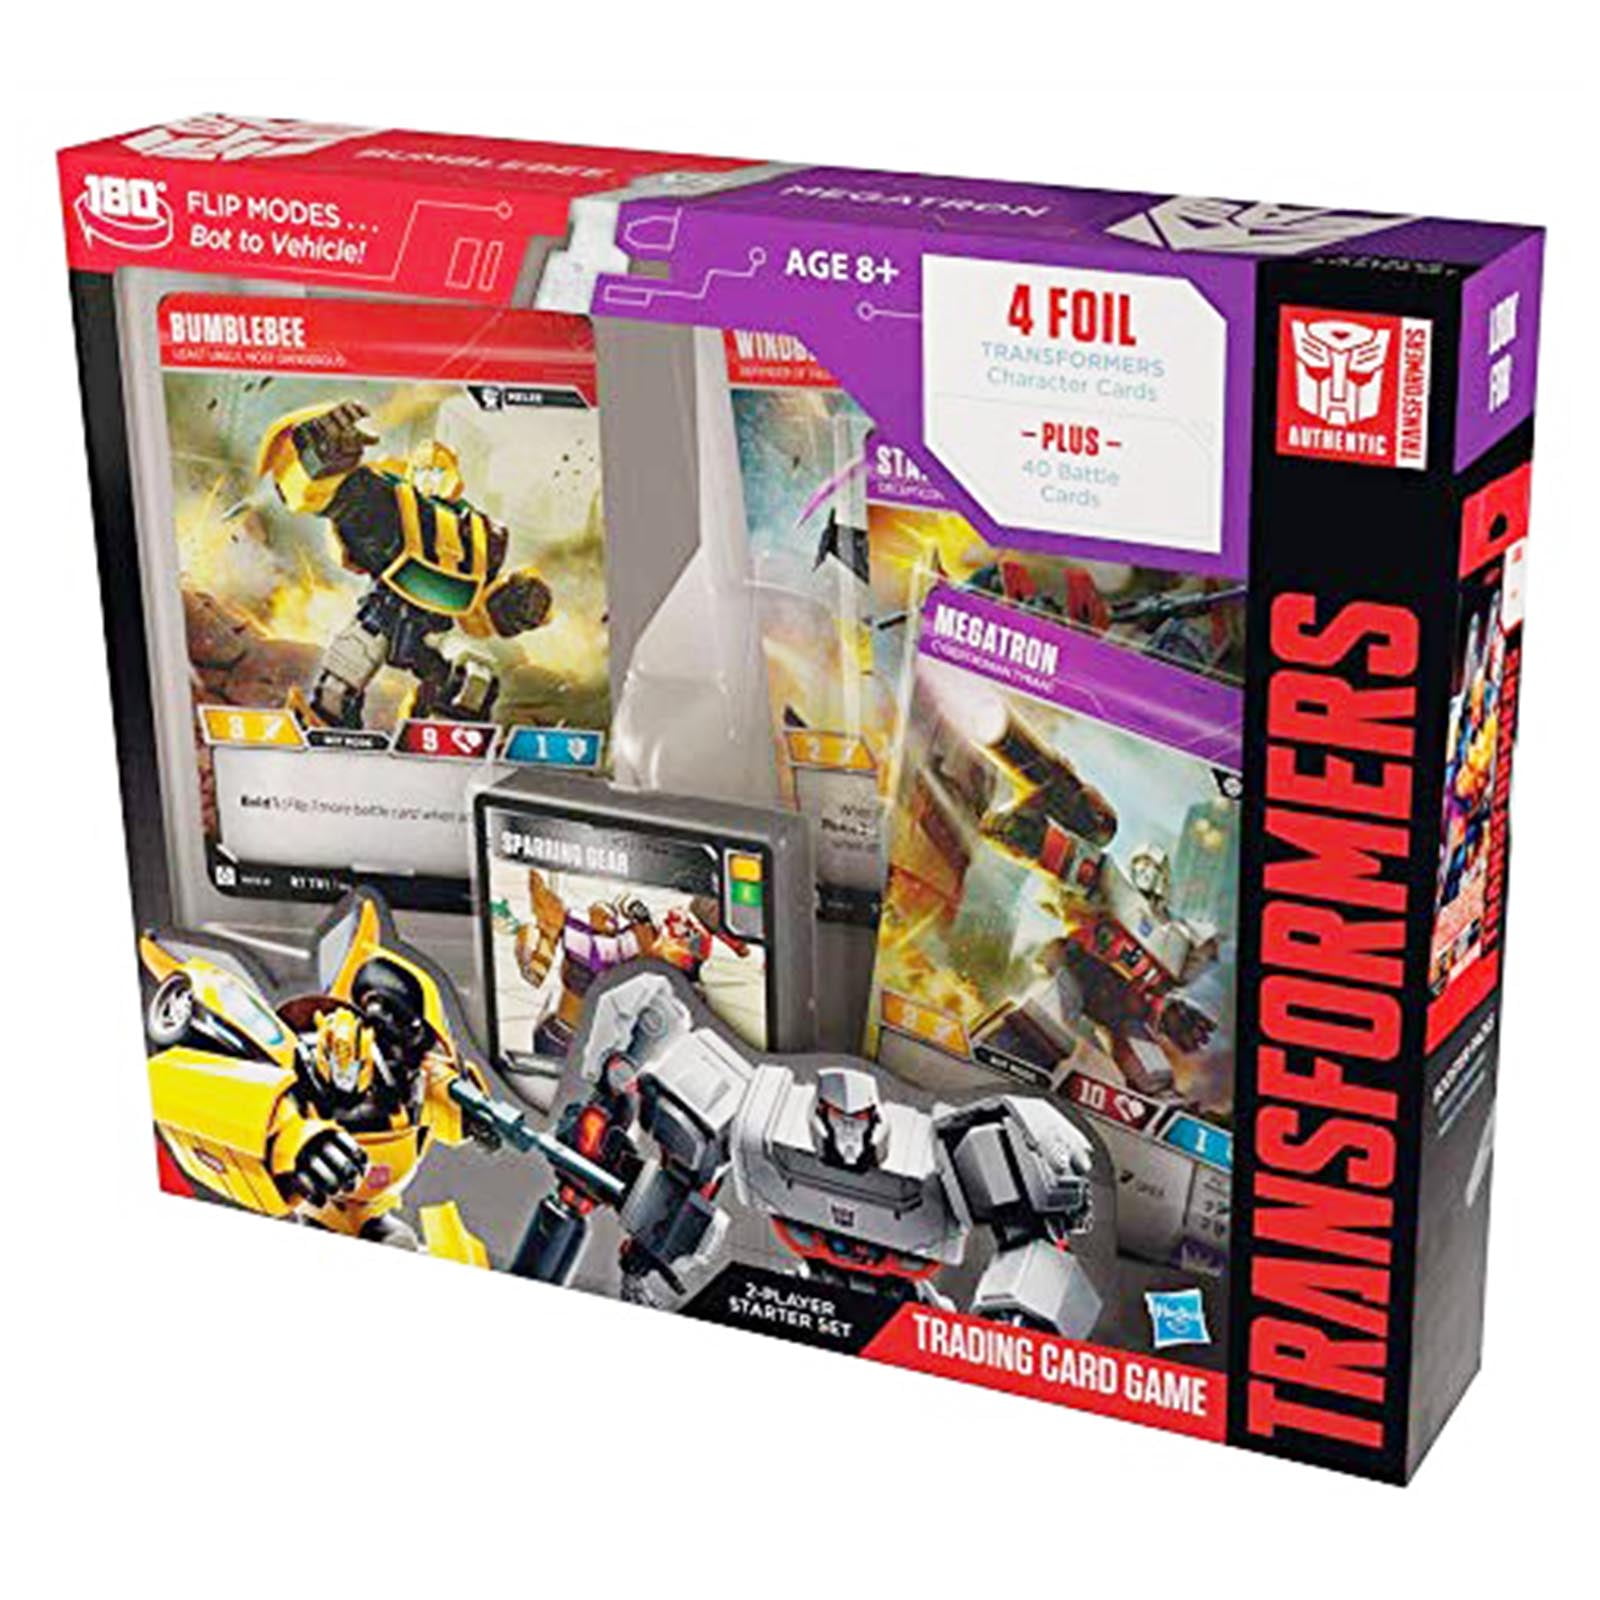 Transformers Bumblebee Movie Playing Cards Deck Brand New 